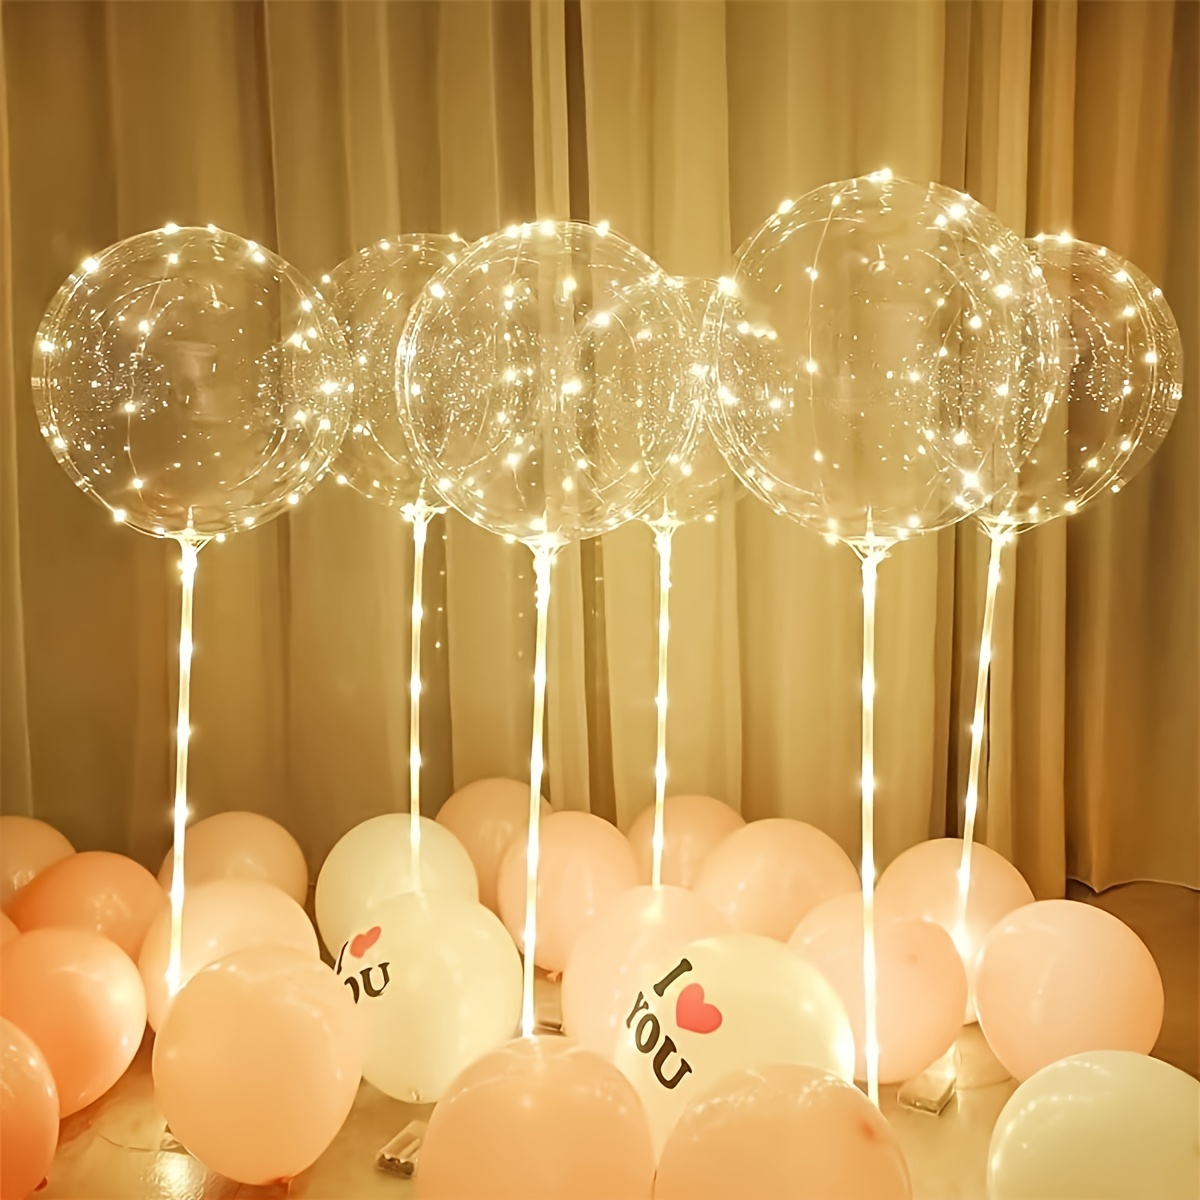 

Led Light Up Balloons With Sticks, 18-pack Transparent Illuminated Balloons For Party, Birthday, Wedding, Valentine's, Christmas Decor, Photo Props - Cold White, Latex, 14+ Years